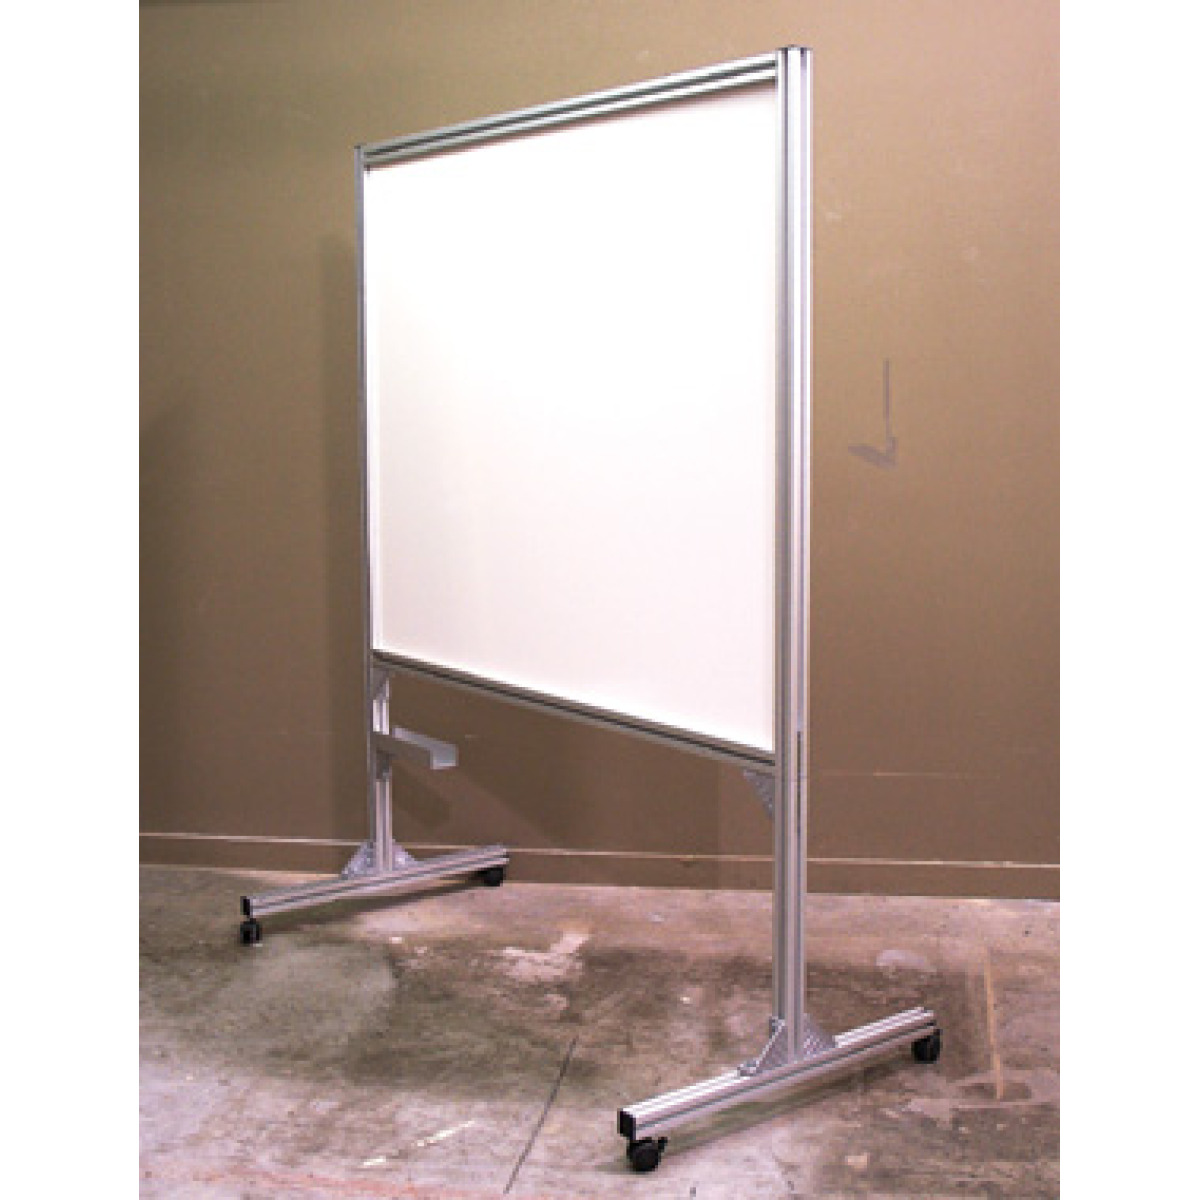 Rolling Two-Sided Whiteboard  Double-Sided Dry Erase Board